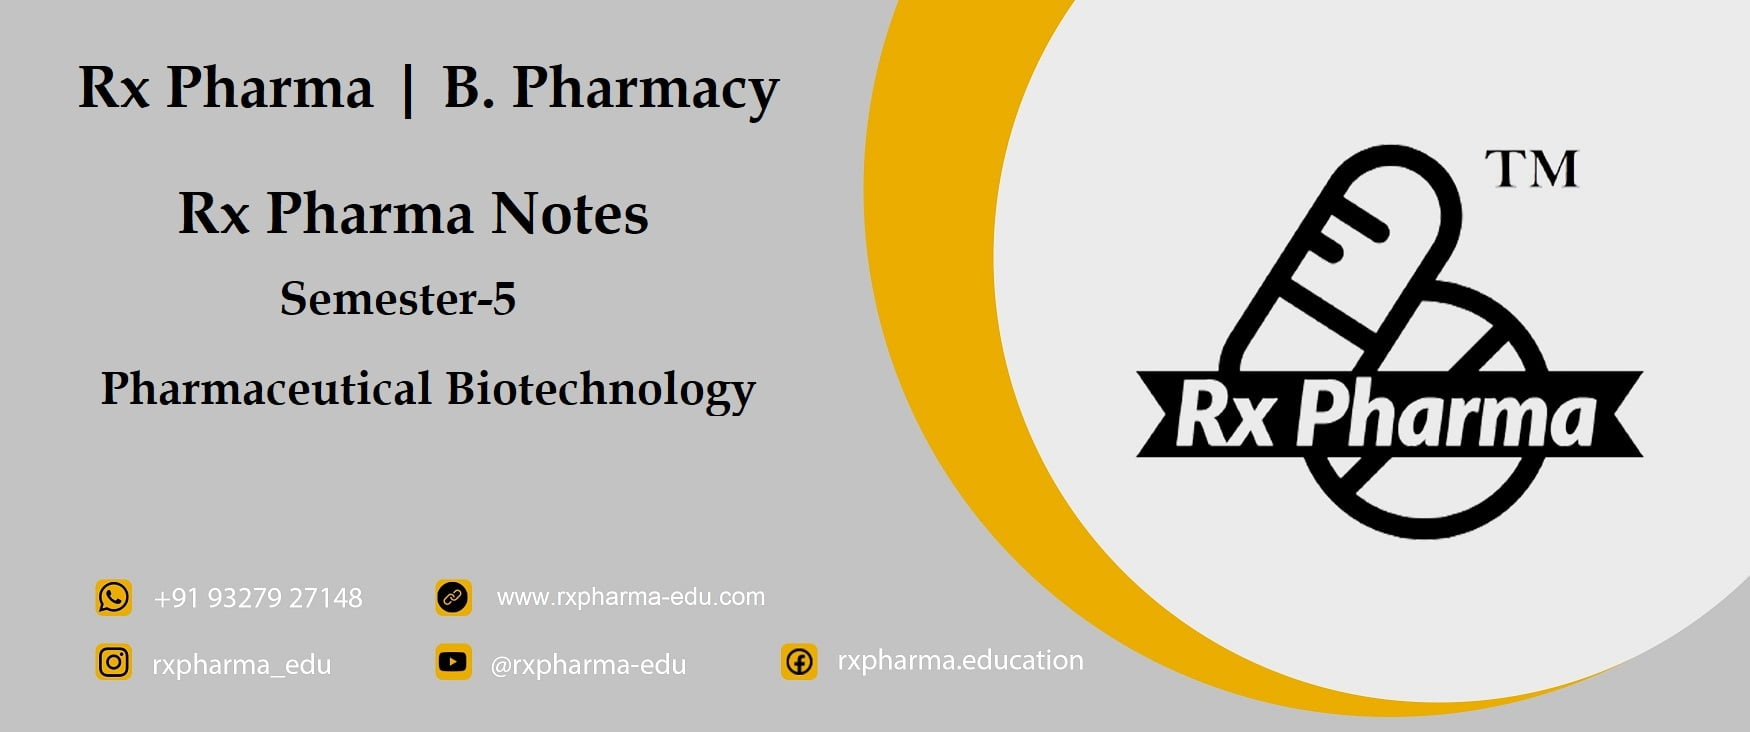 Pharmaceutical Biotechnology Notes Banner